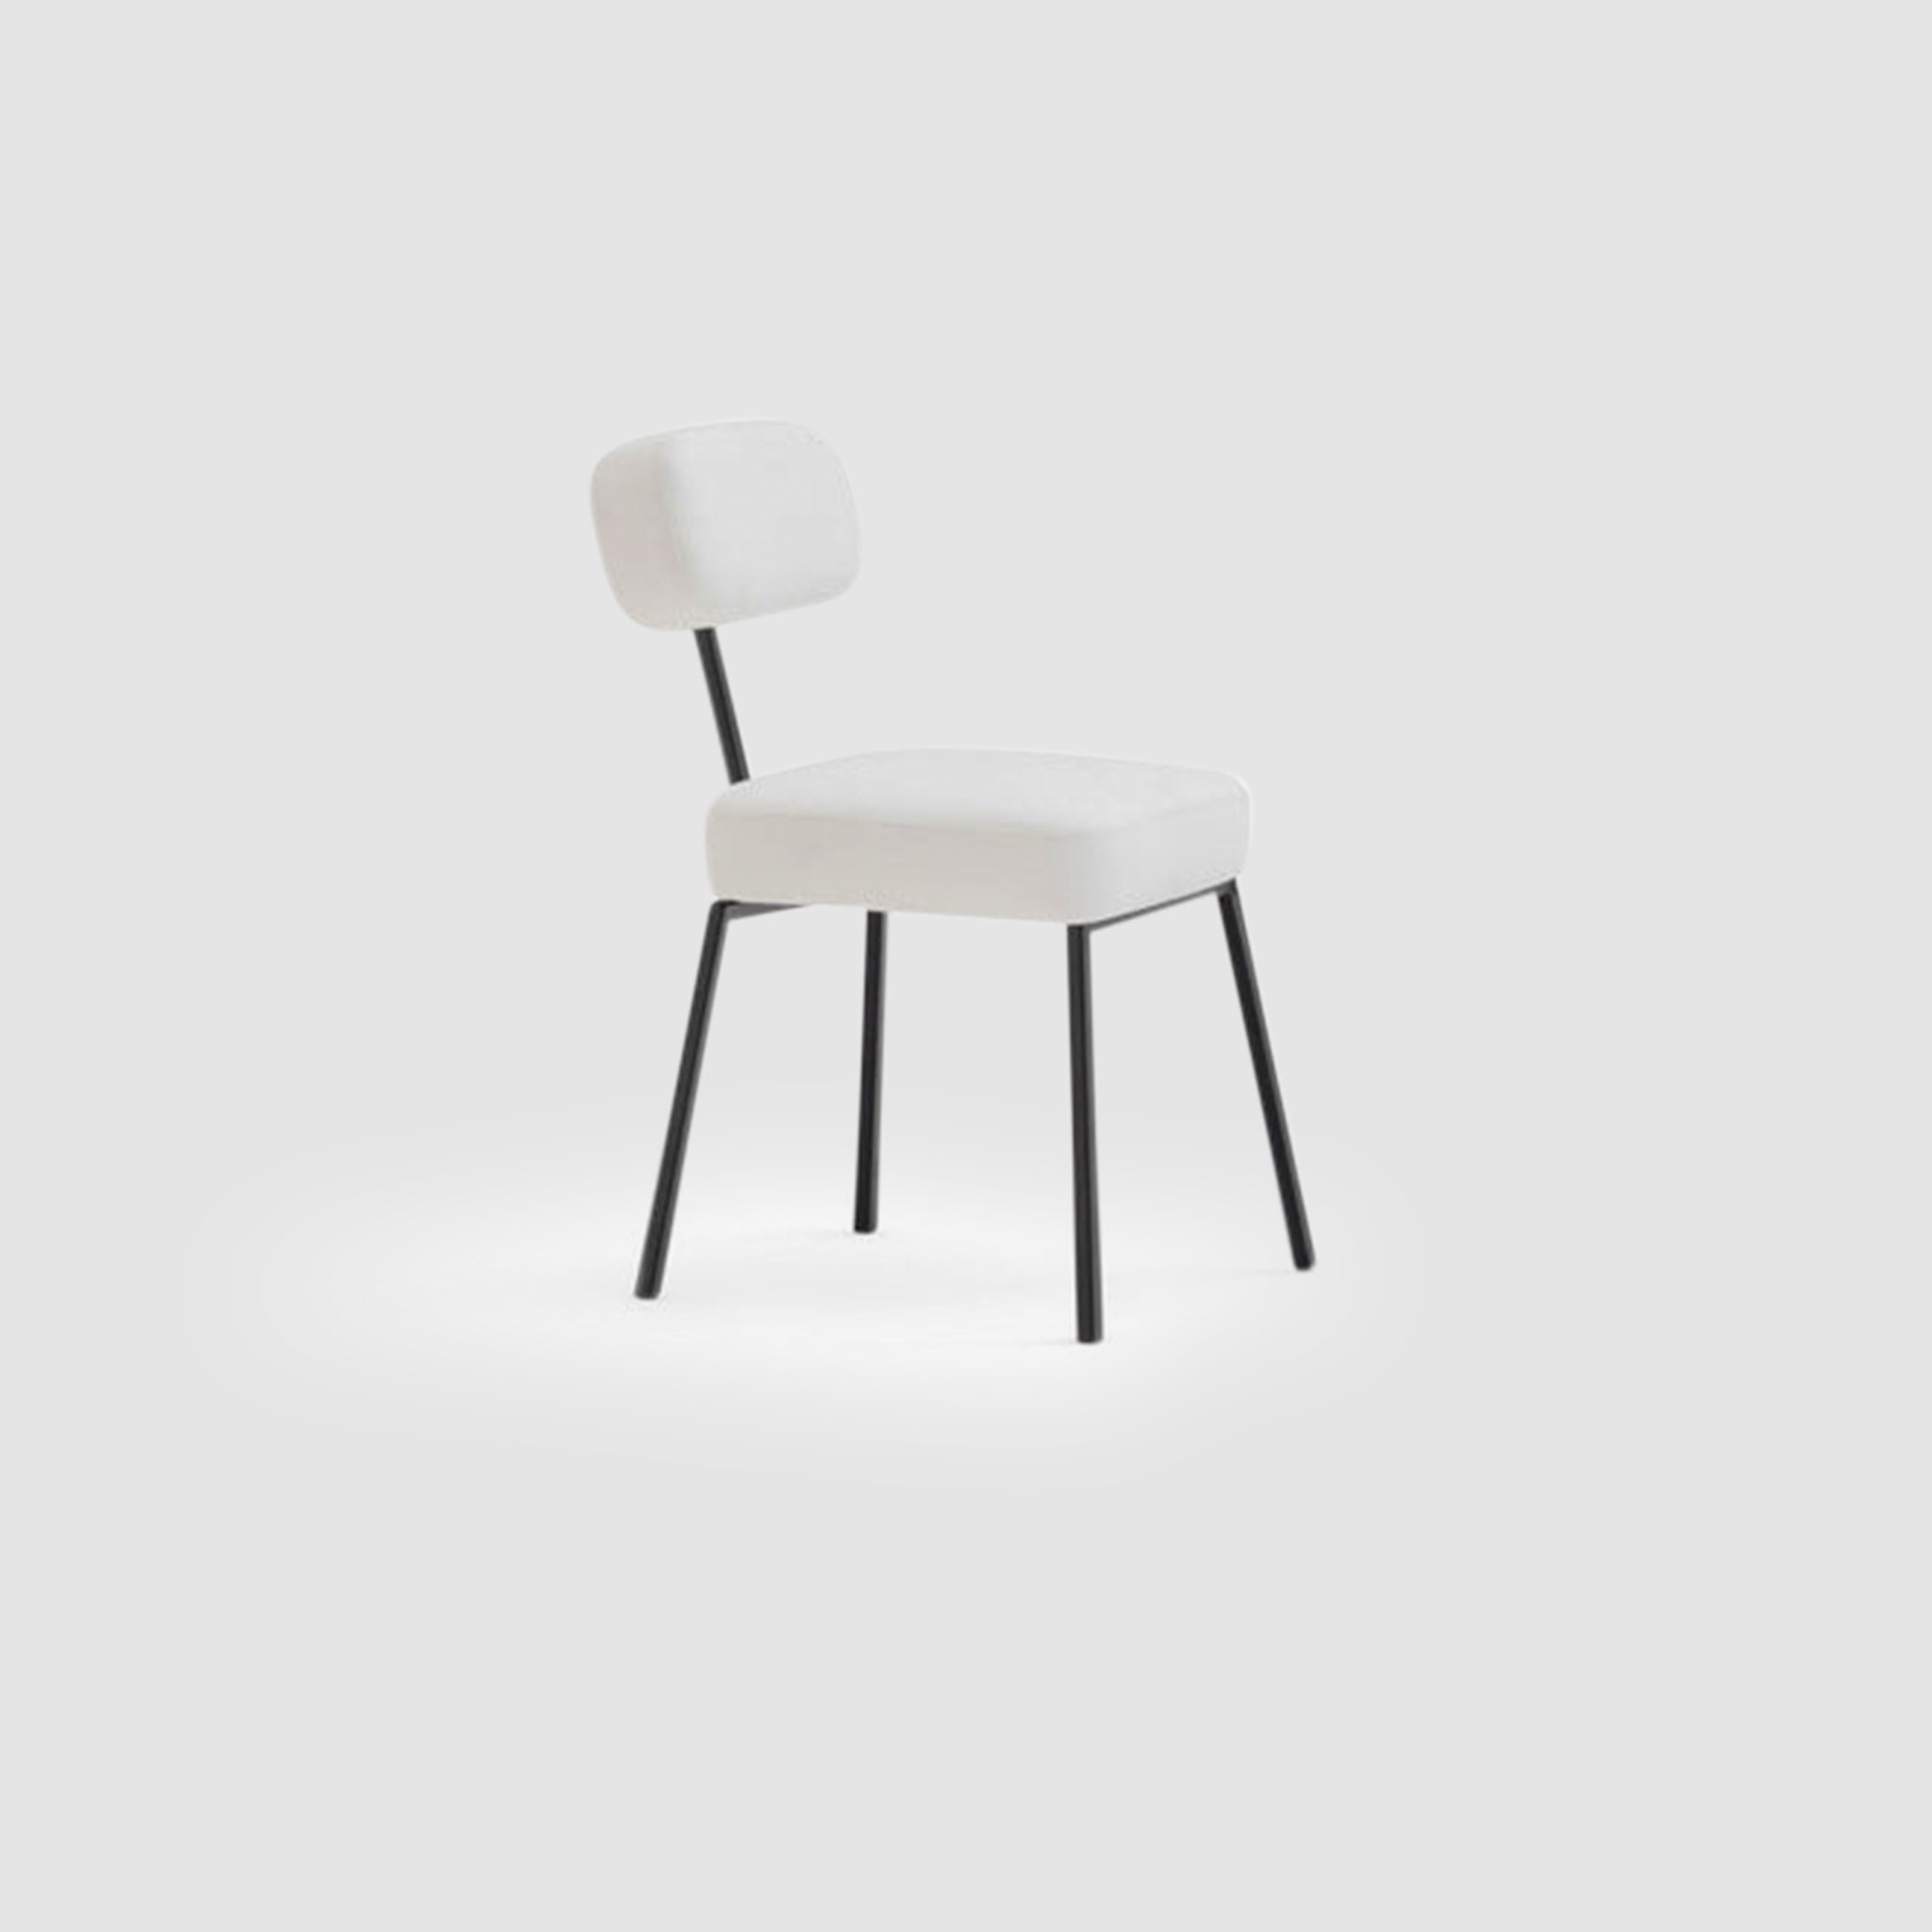 The Ida Dining Chair - minimalist design with a black steel frame and white cushioned seat and backrest, showcasing modern and ergonomic style.